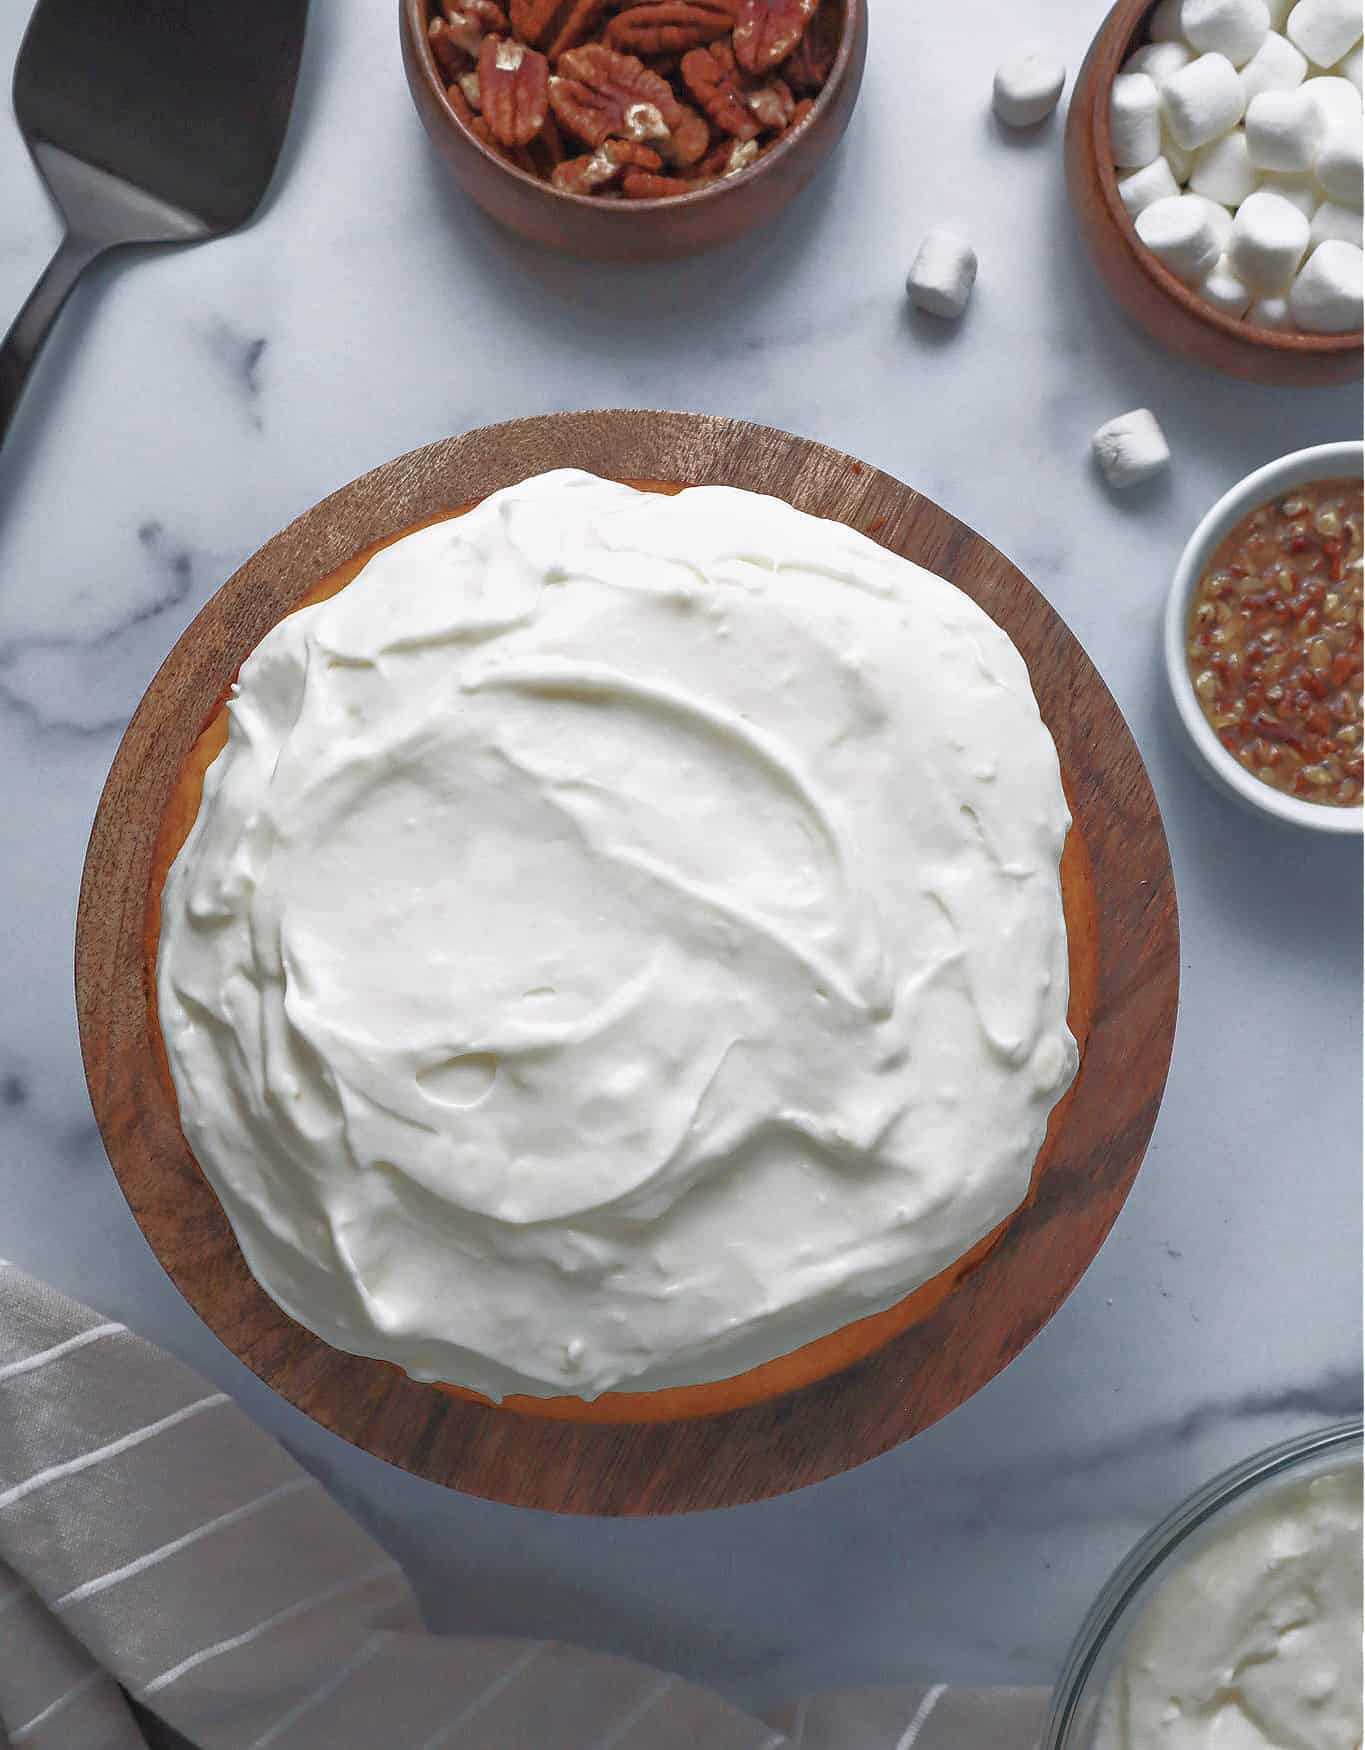 marshmallow frosting spread on top of sweet potato cake layer.